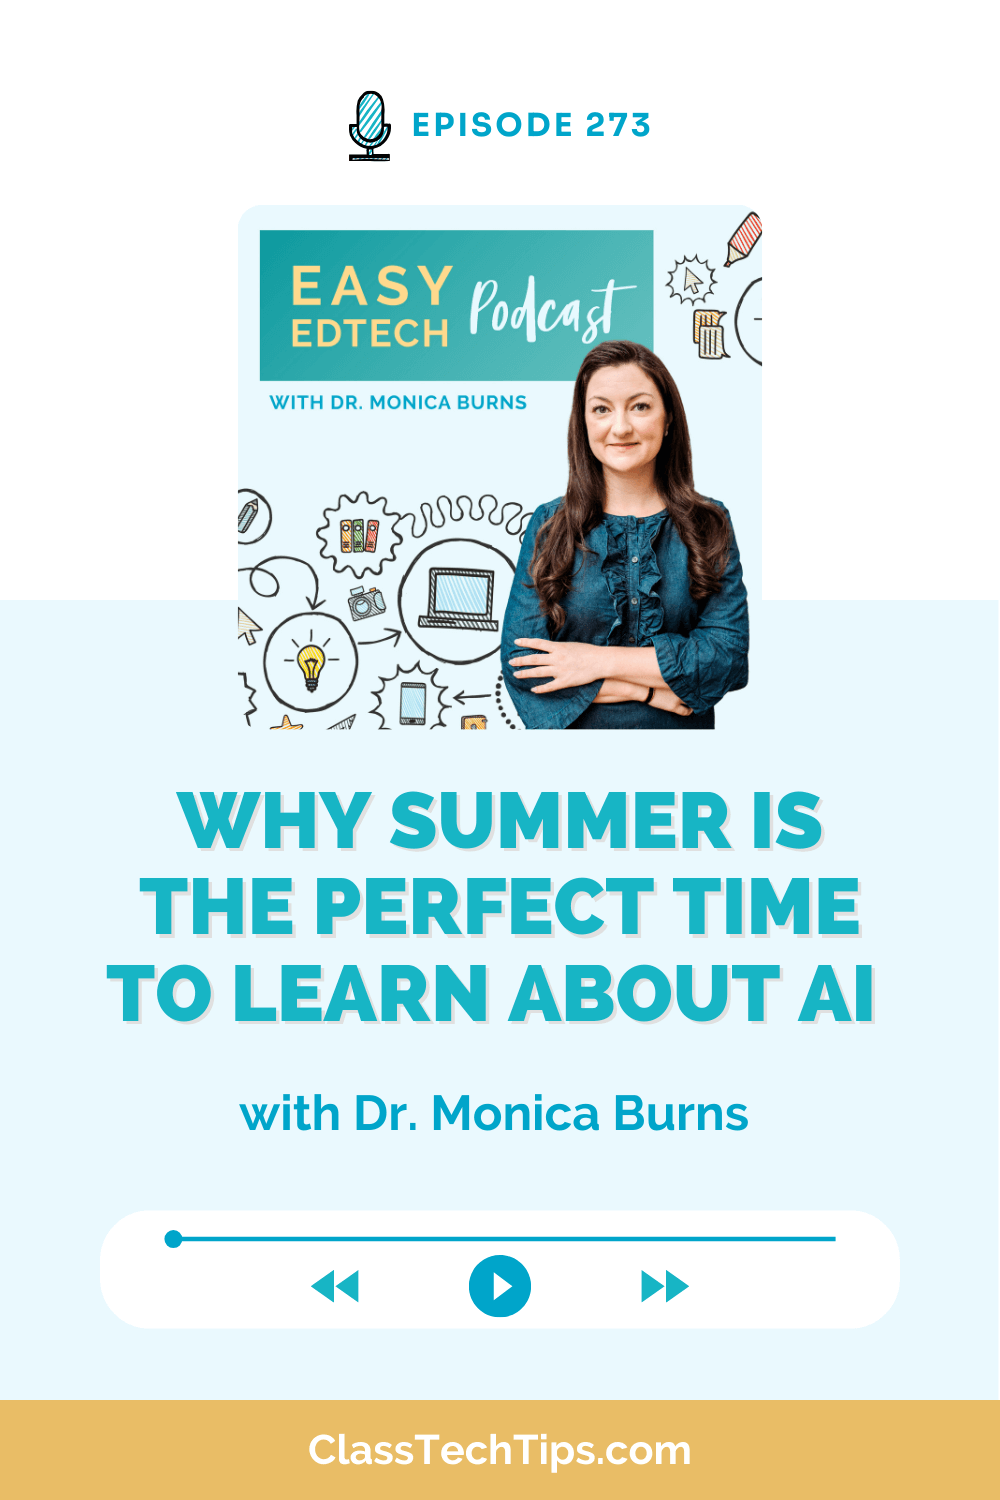 Discover how educators can use the summer months to learn about AI in this bonus episode of the Easy EdTech Podcast. Dr. Monica Burns shares tips on leveraging AI for creative projects and planning for the new school year.